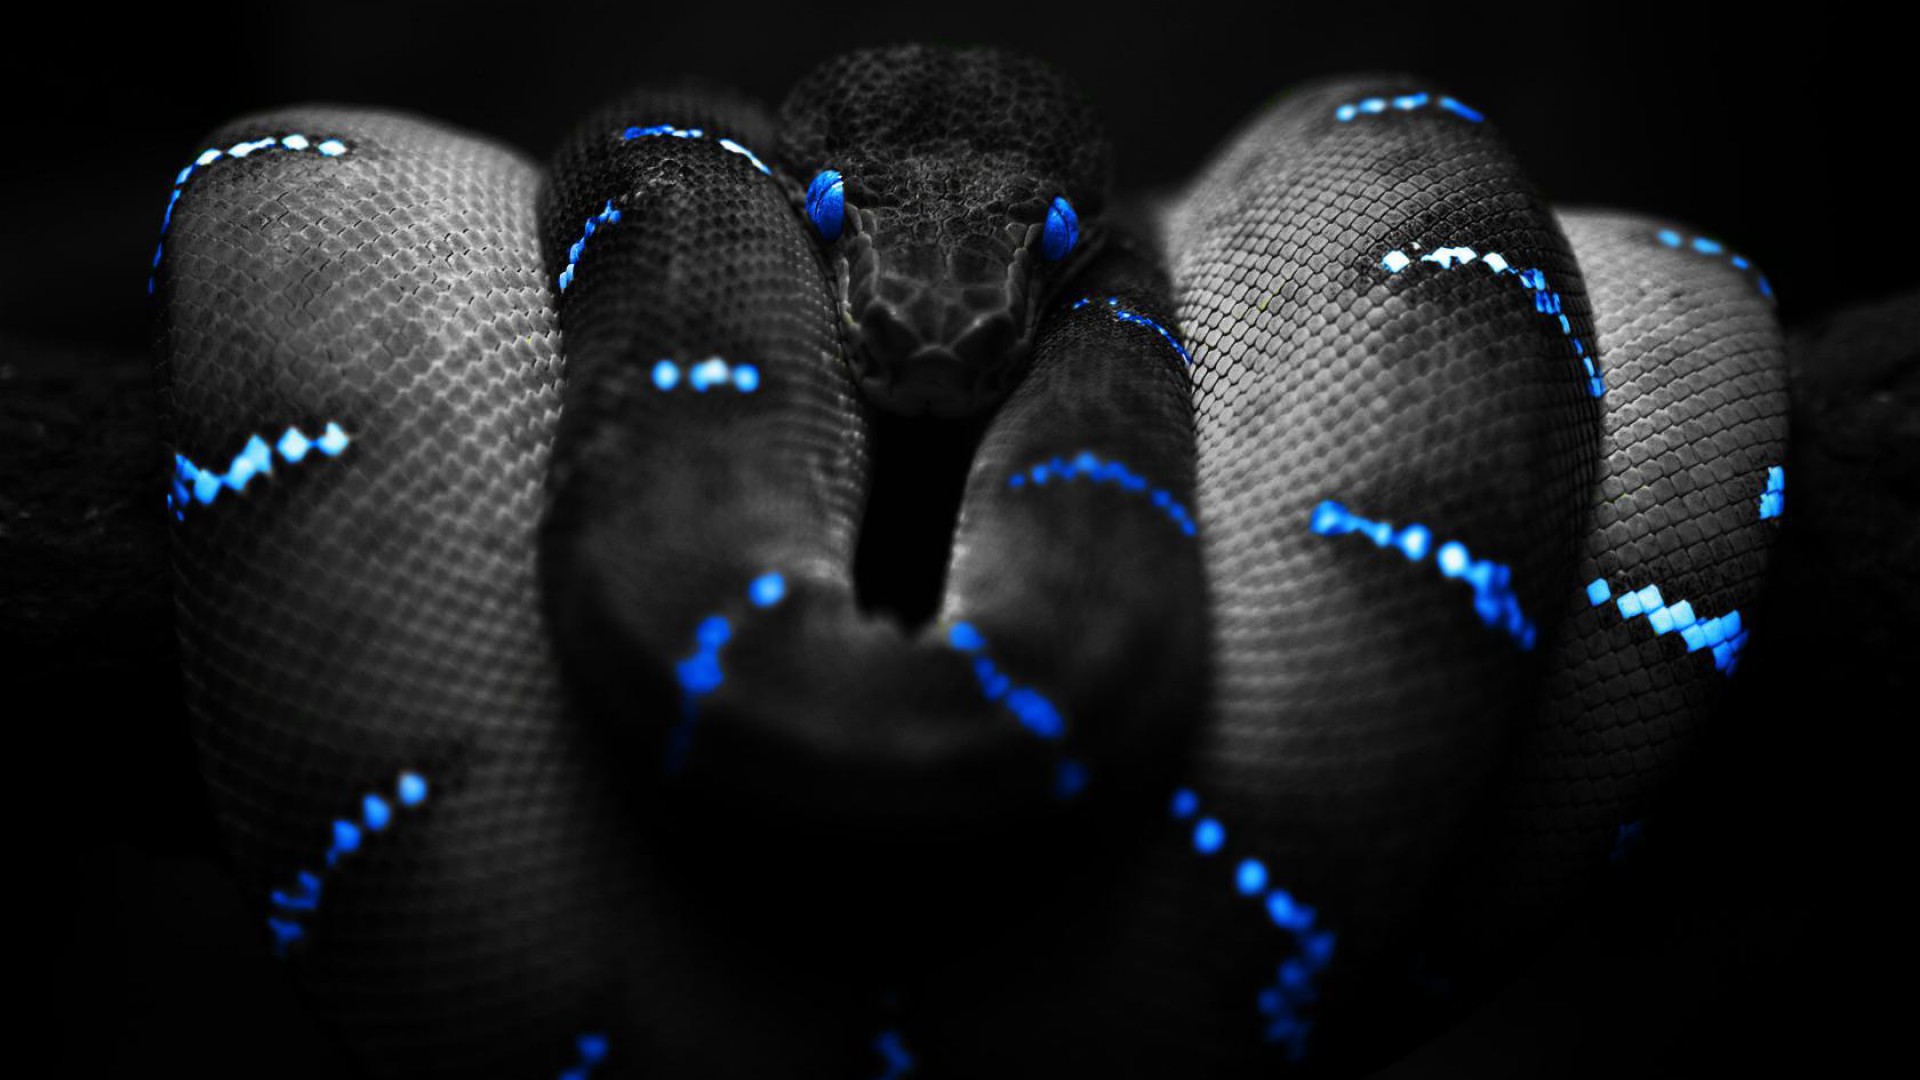 Snake Wallpapers Best Wallpapers